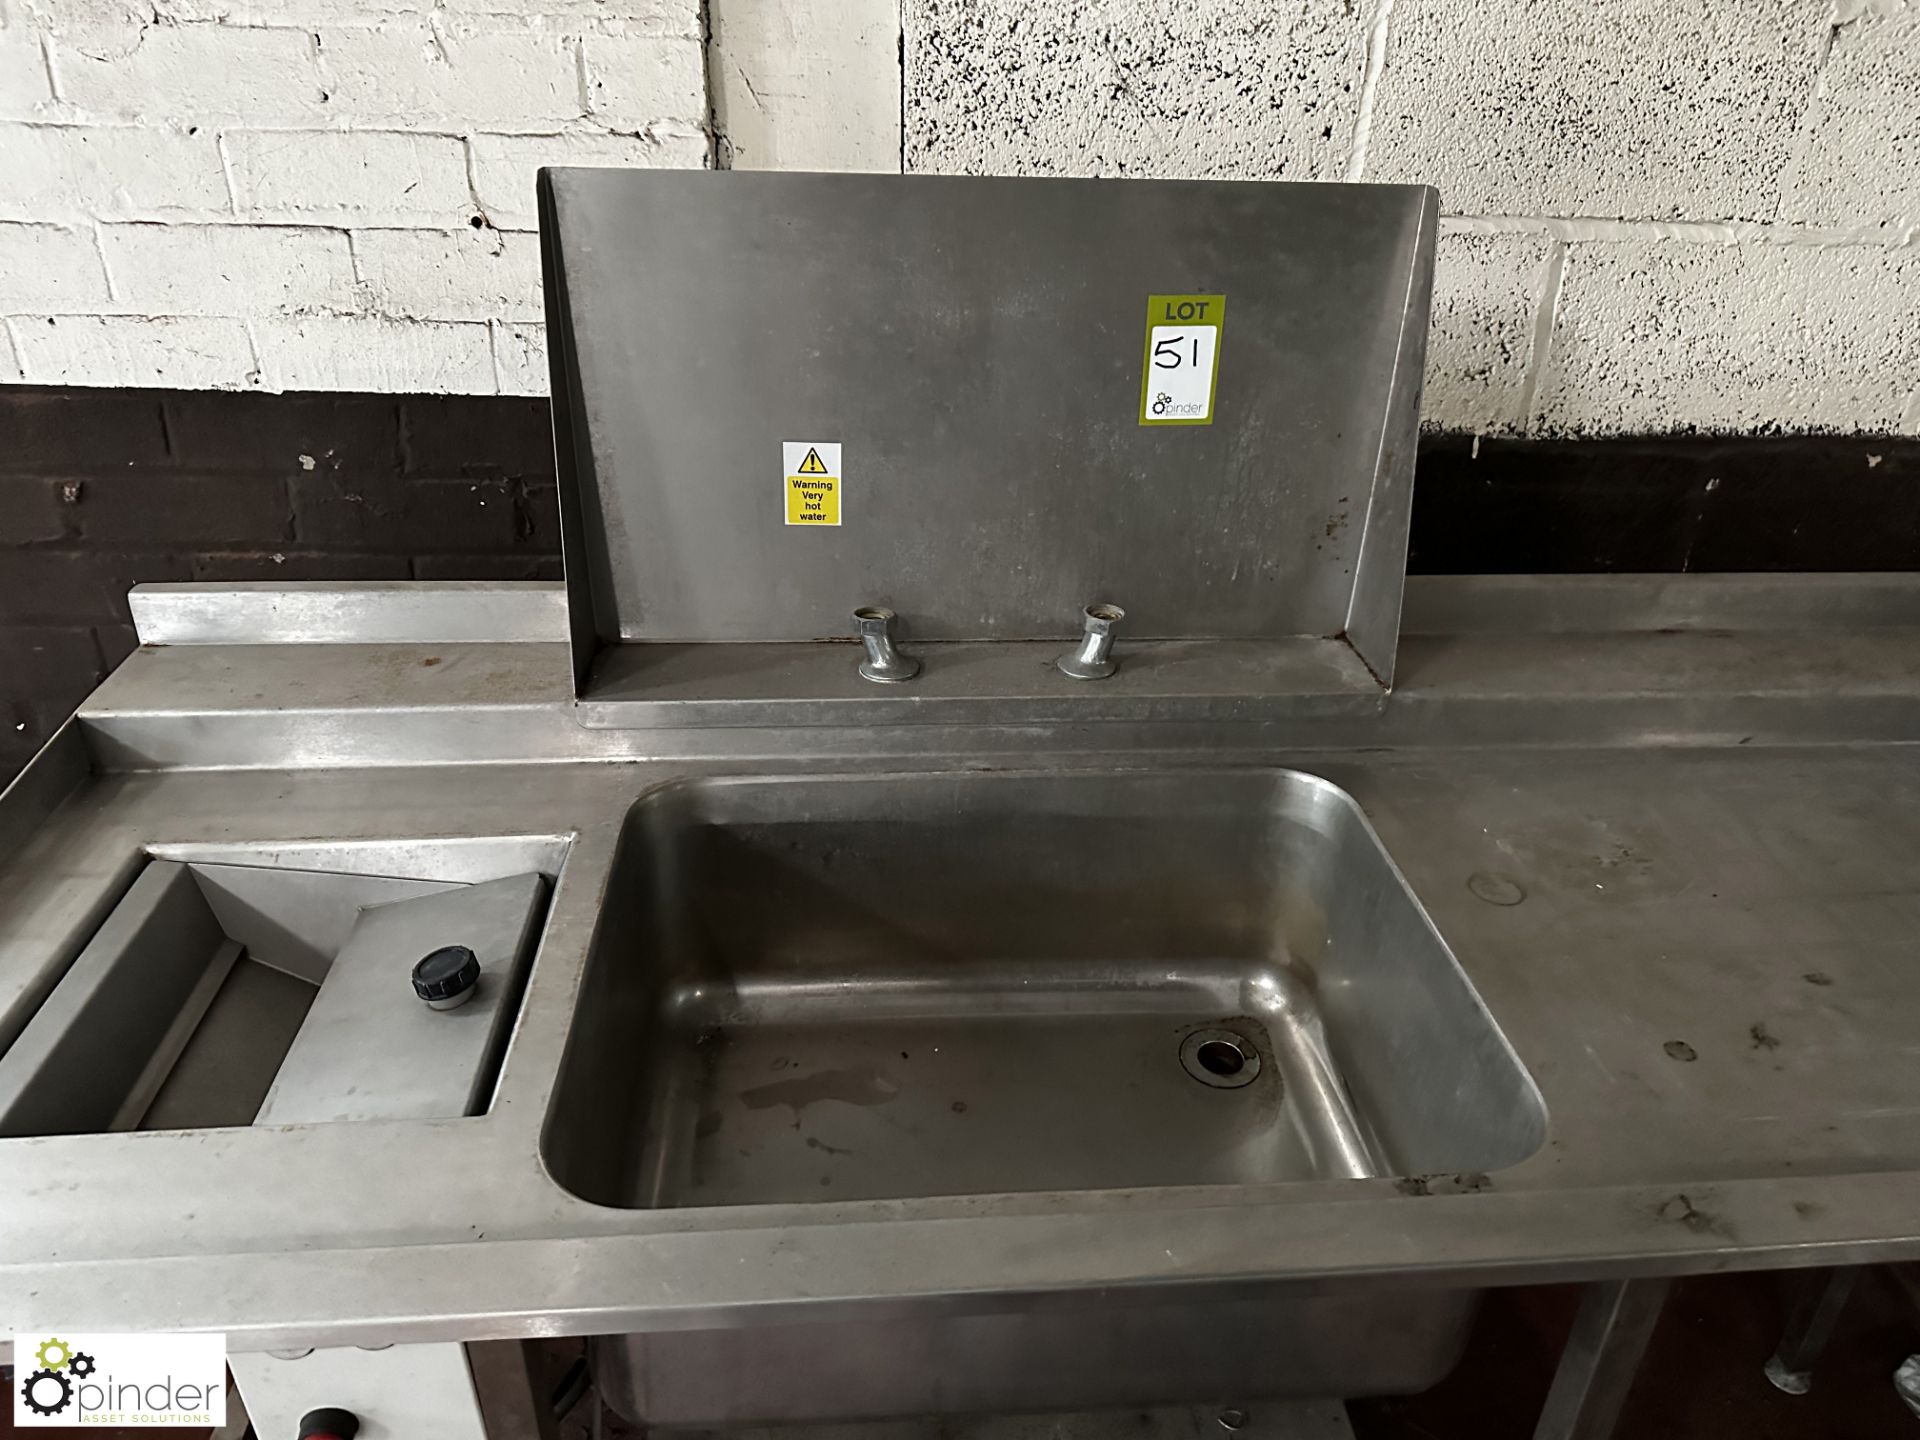 Stainless steel Wash Sink, 1800mm x 710mm x 810mm, with waste disposal unit - Image 3 of 5